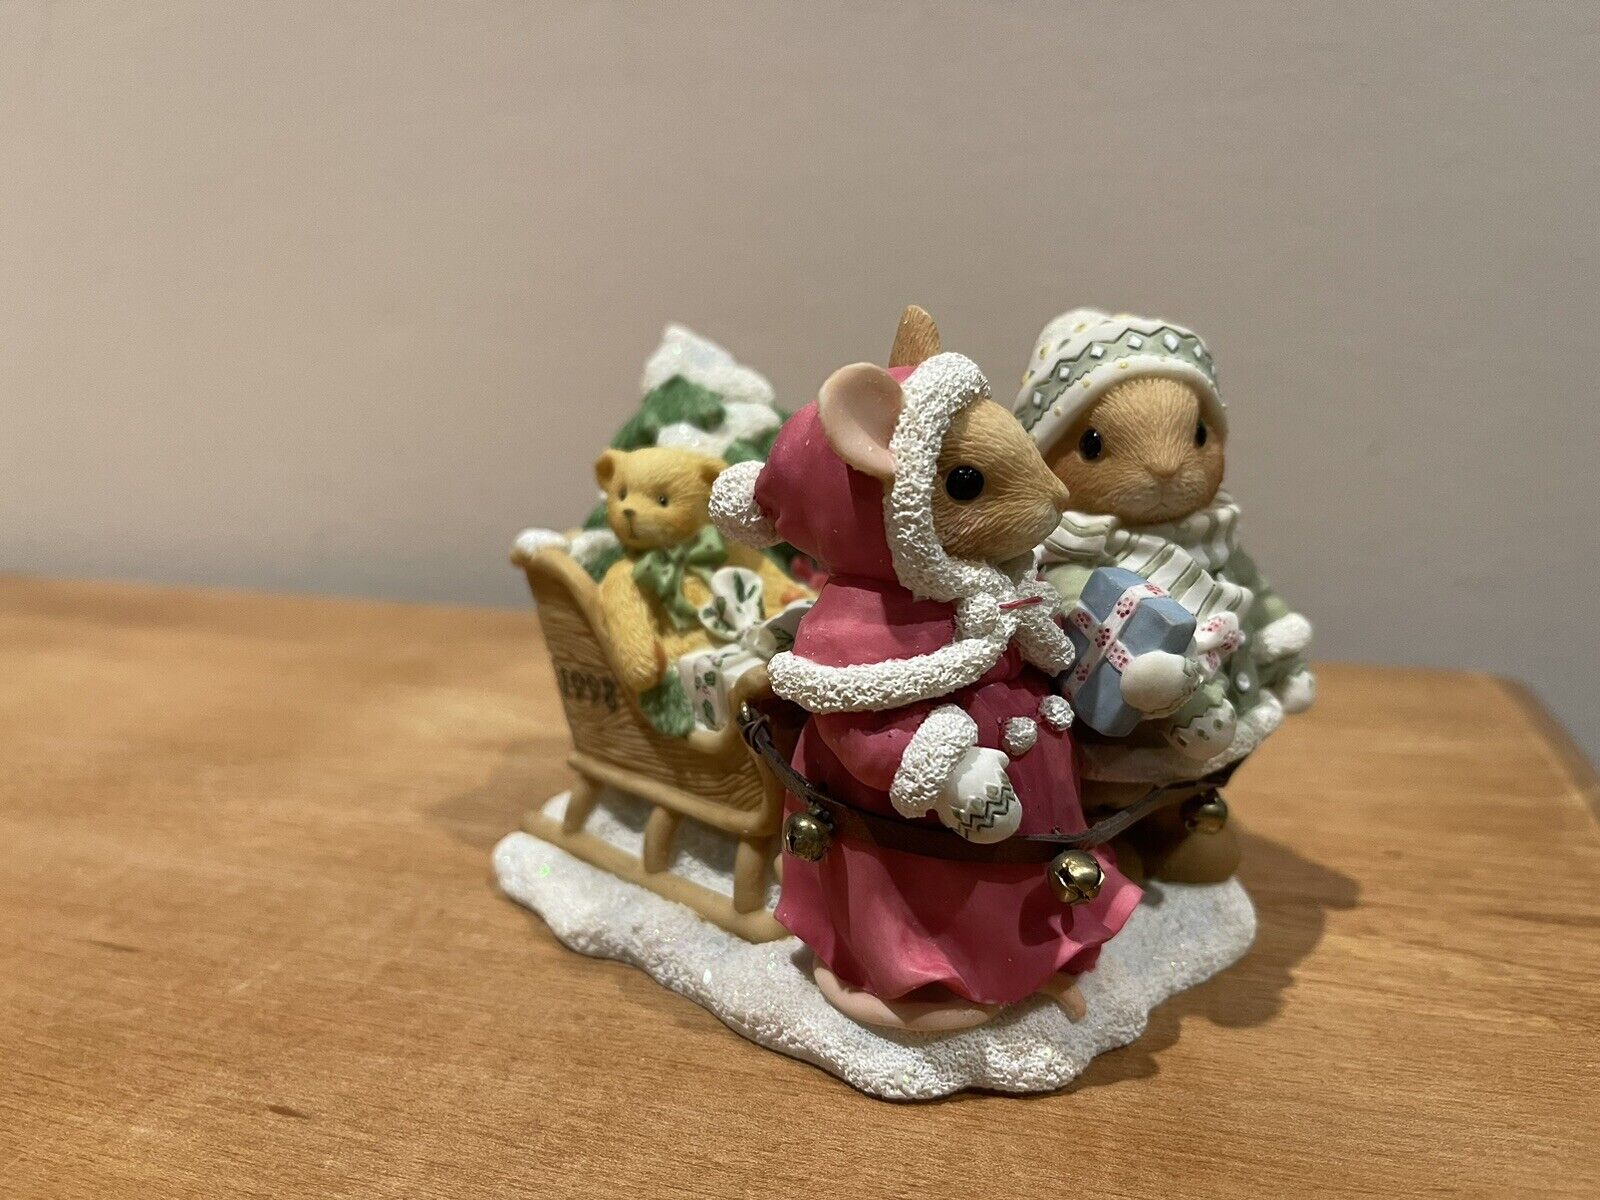 Priscilla's Mouse Tales “Friendship Delivers Hoilday Wishes” Figurine